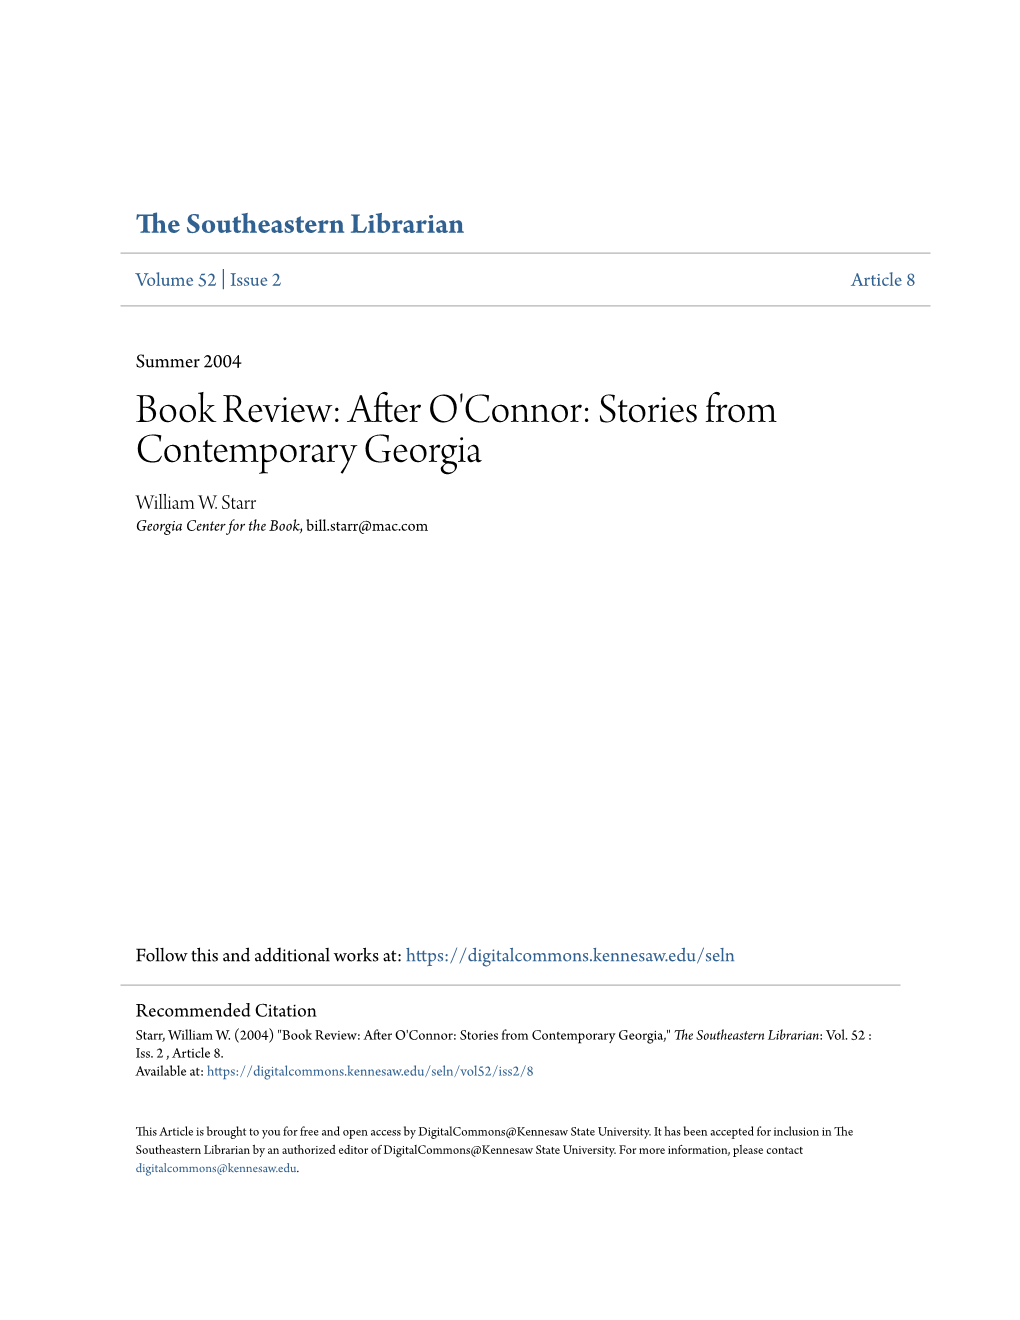 Book Review: After O'connor: Stories from Contemporary Georgia William W